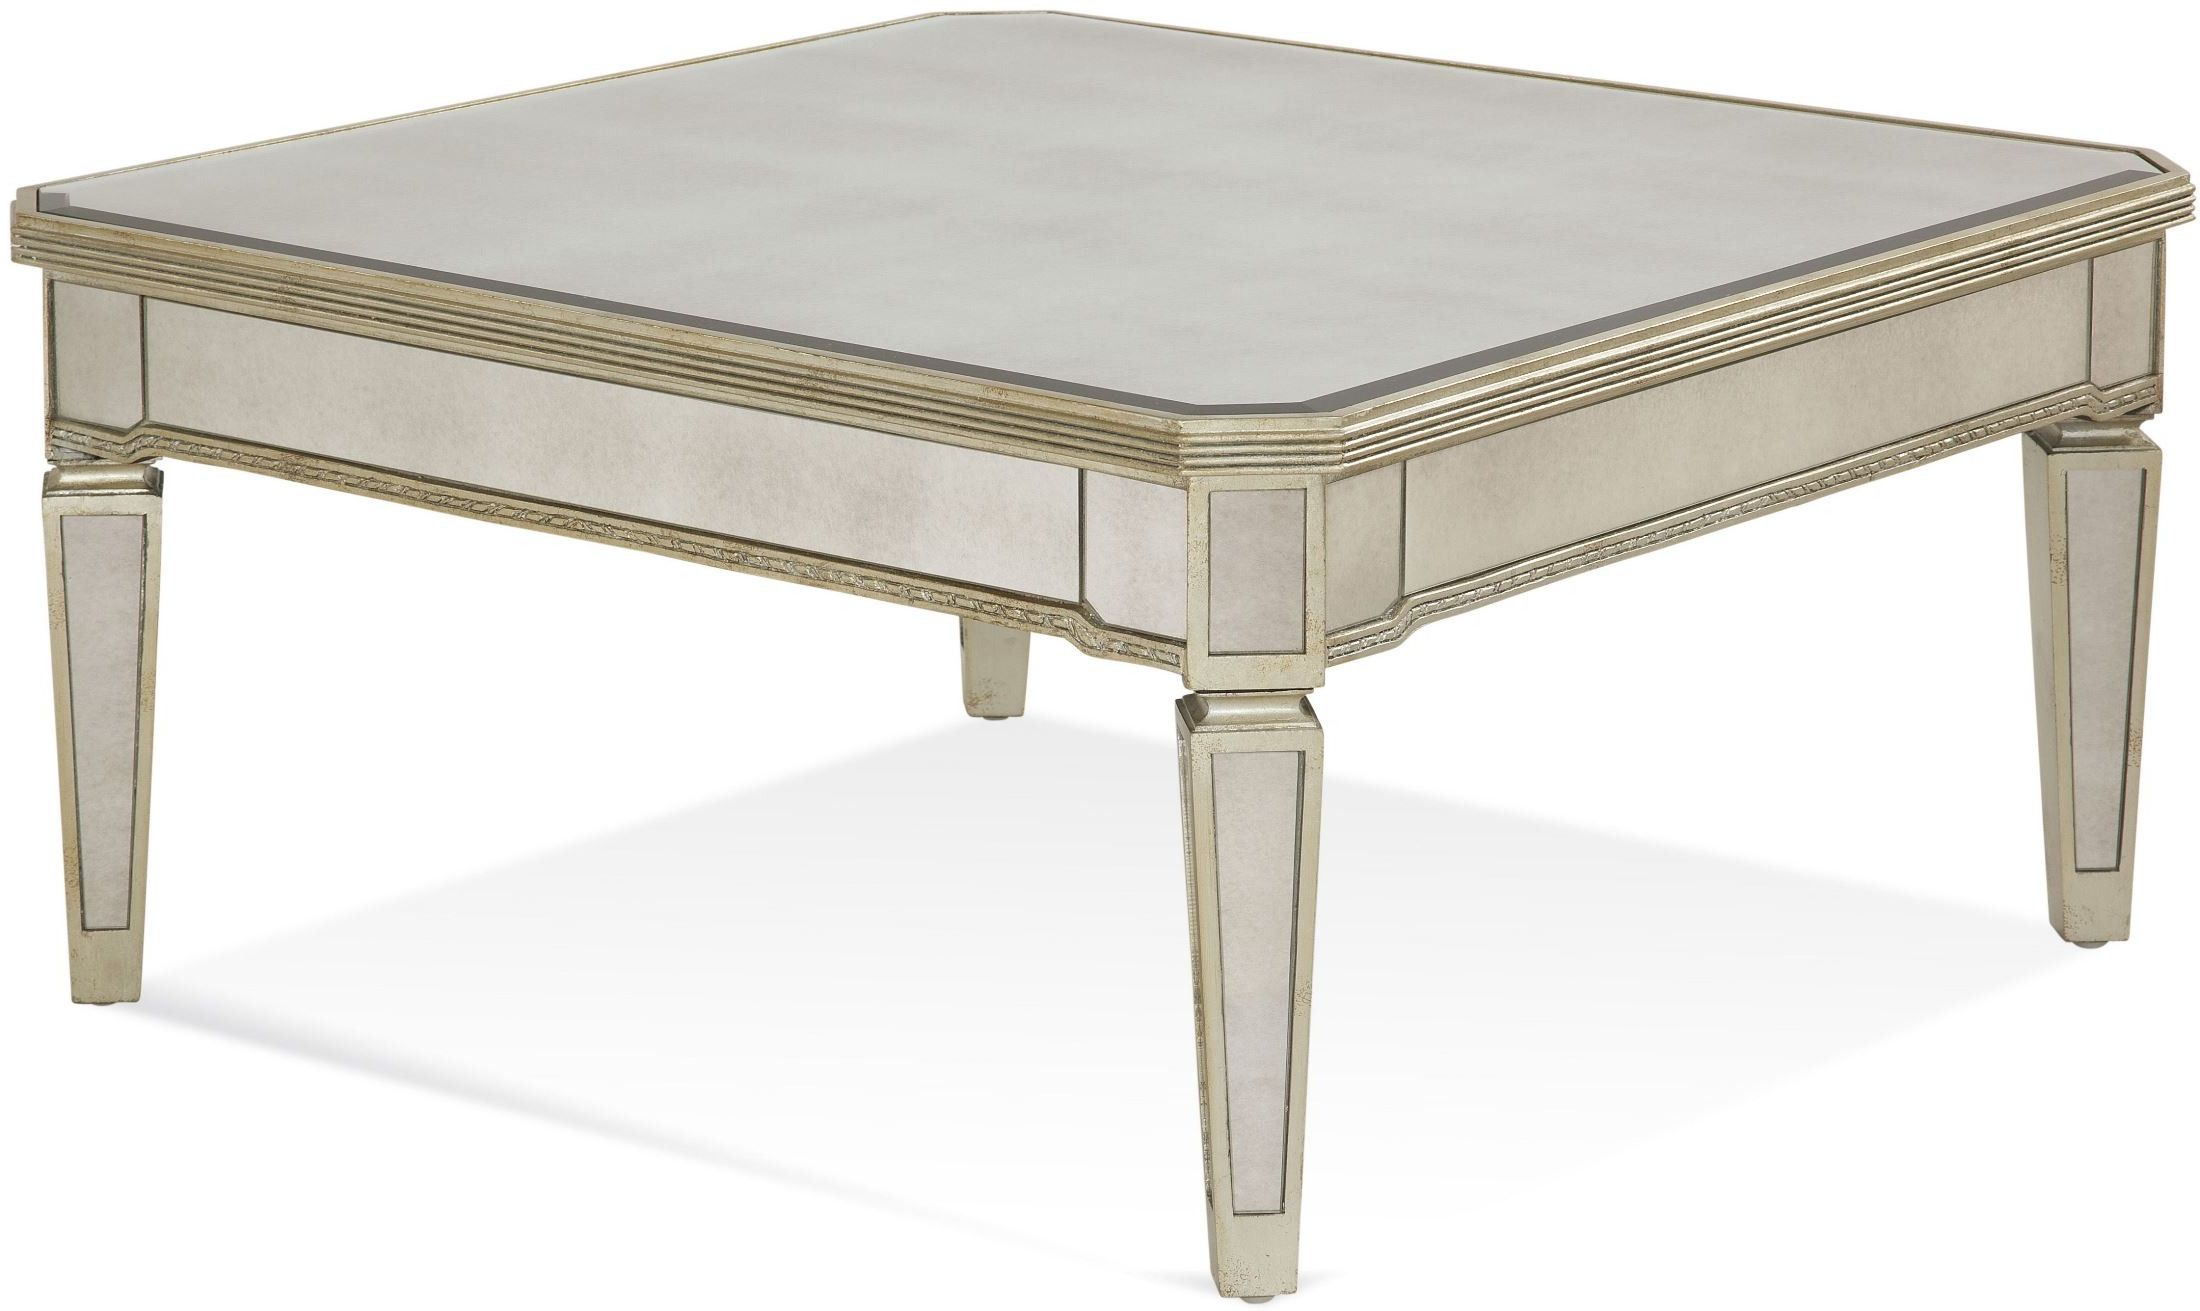 Trendy Antique Mirror Cocktail Tables Regarding Borghese Mirrored Square Cocktail Table From Bassett (View 1 of 20)